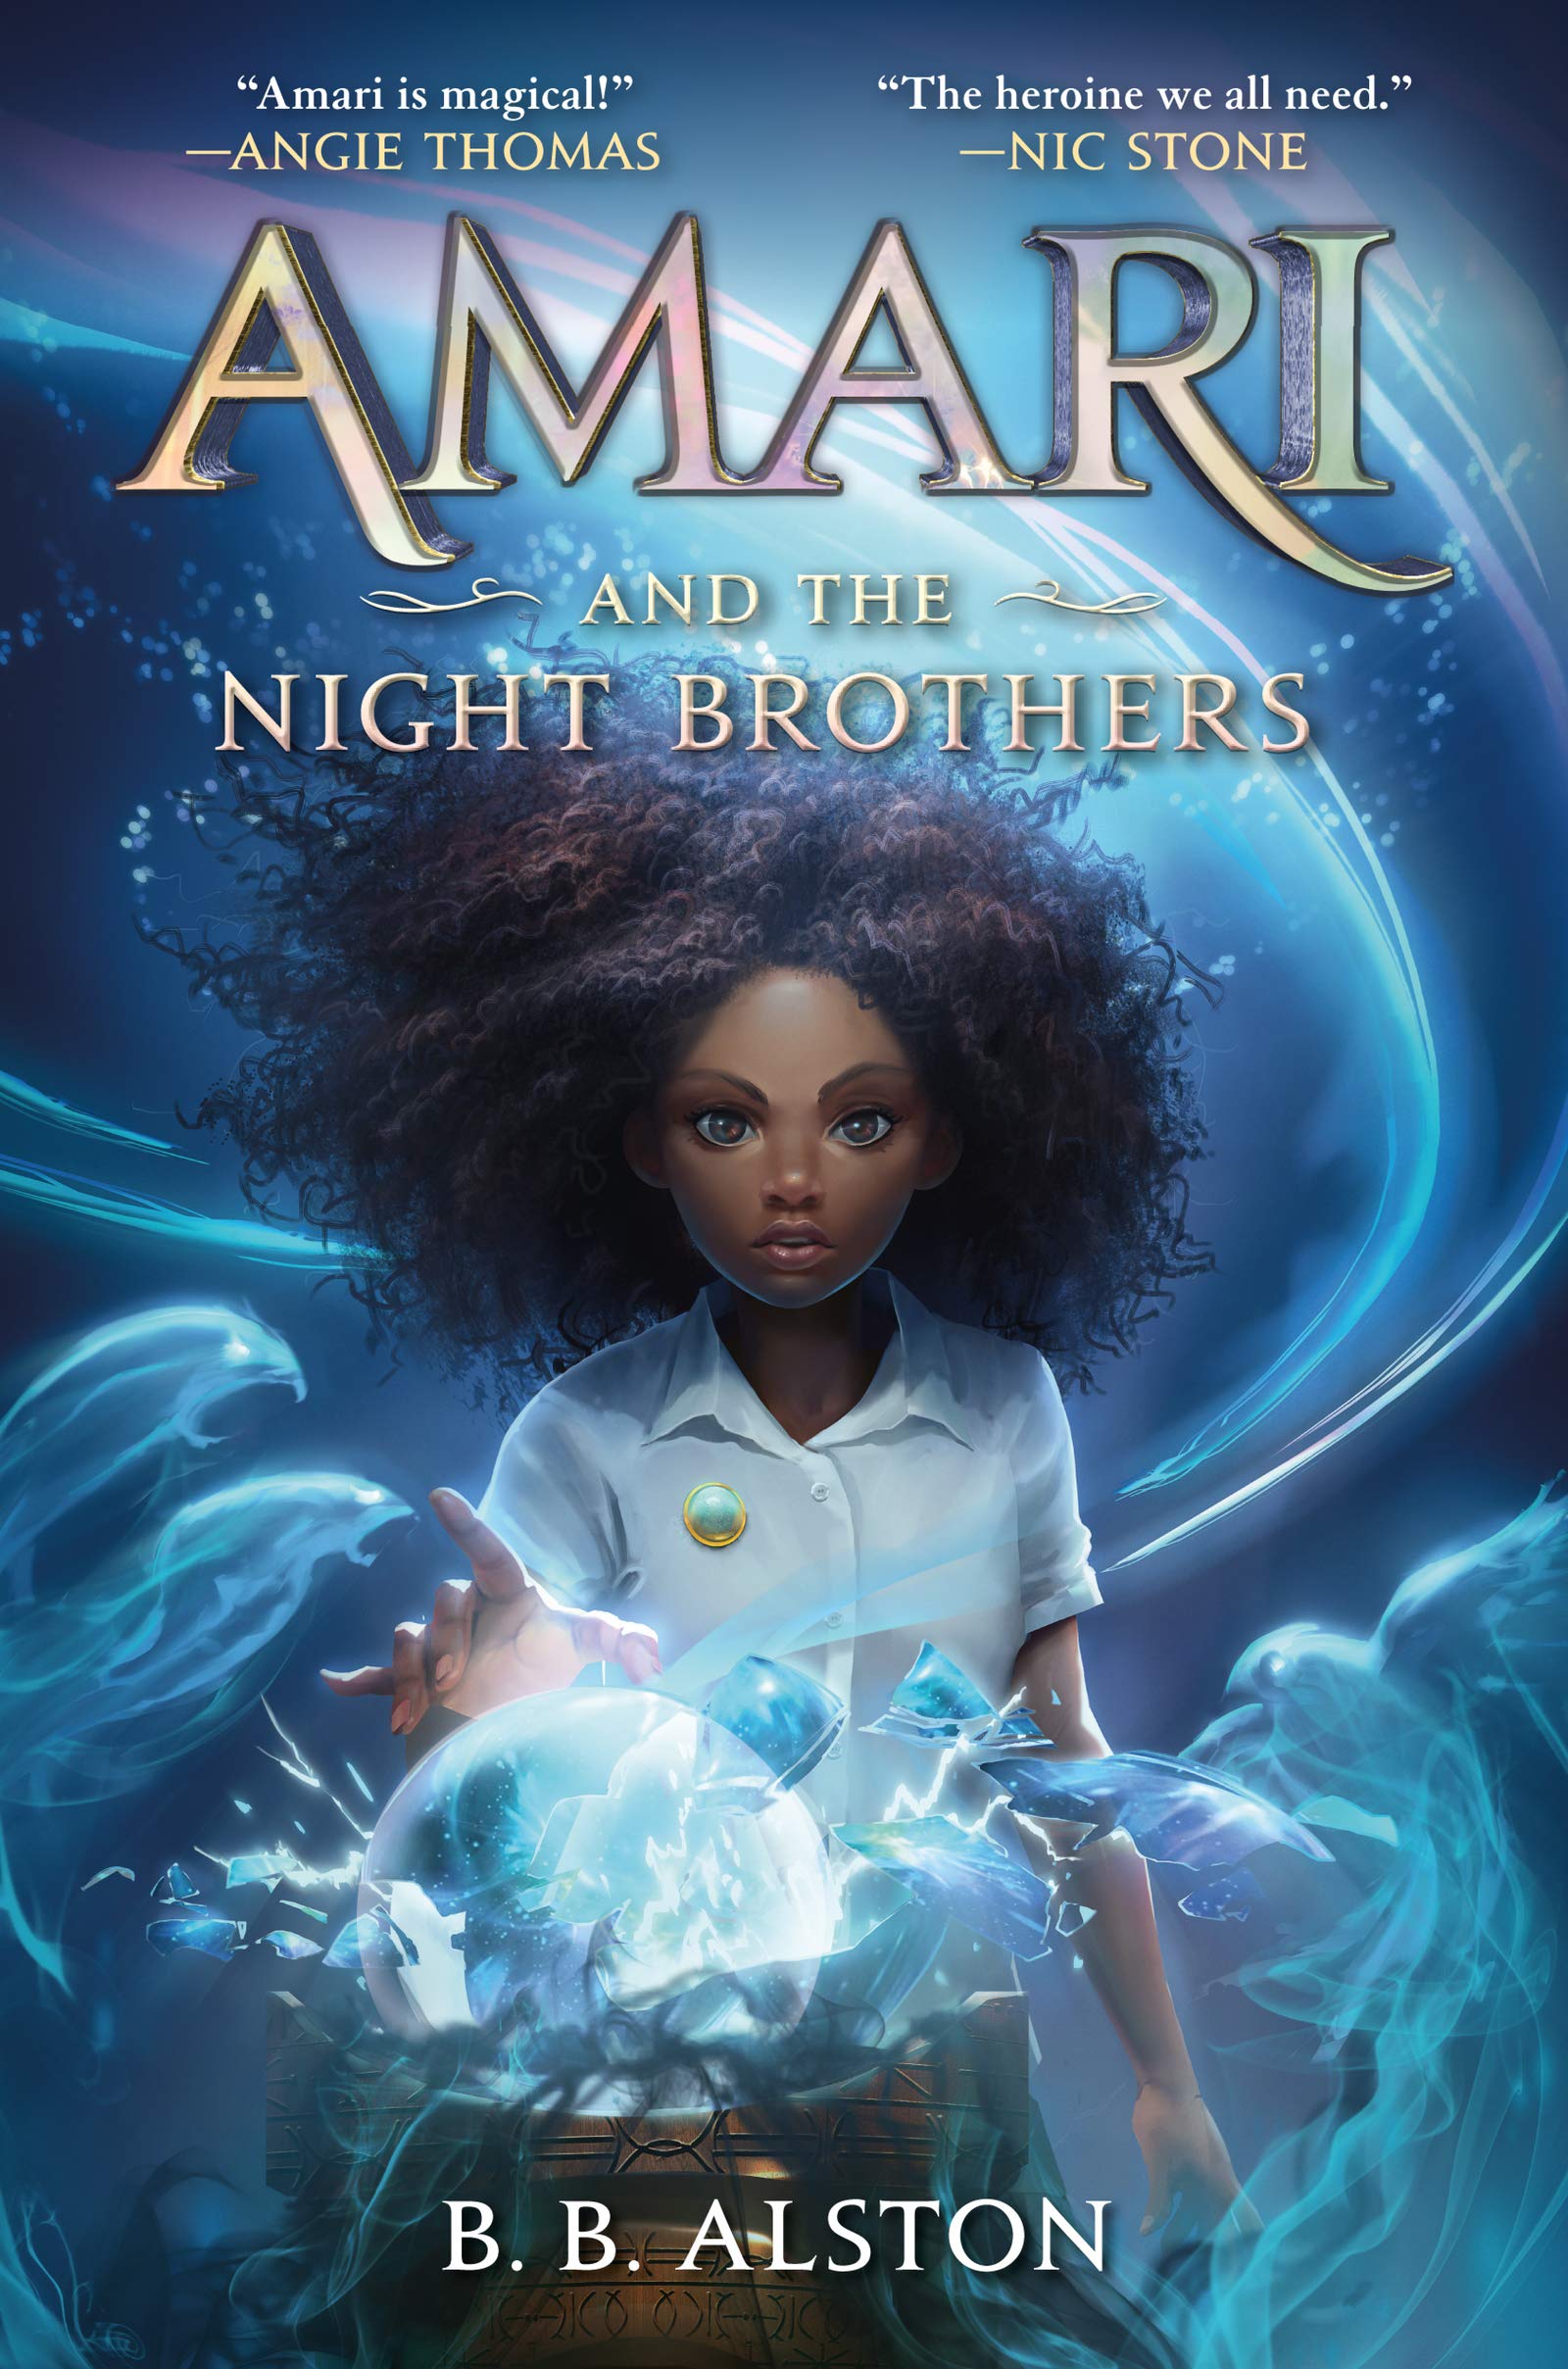 Image for "Amari and the Night Brothers"